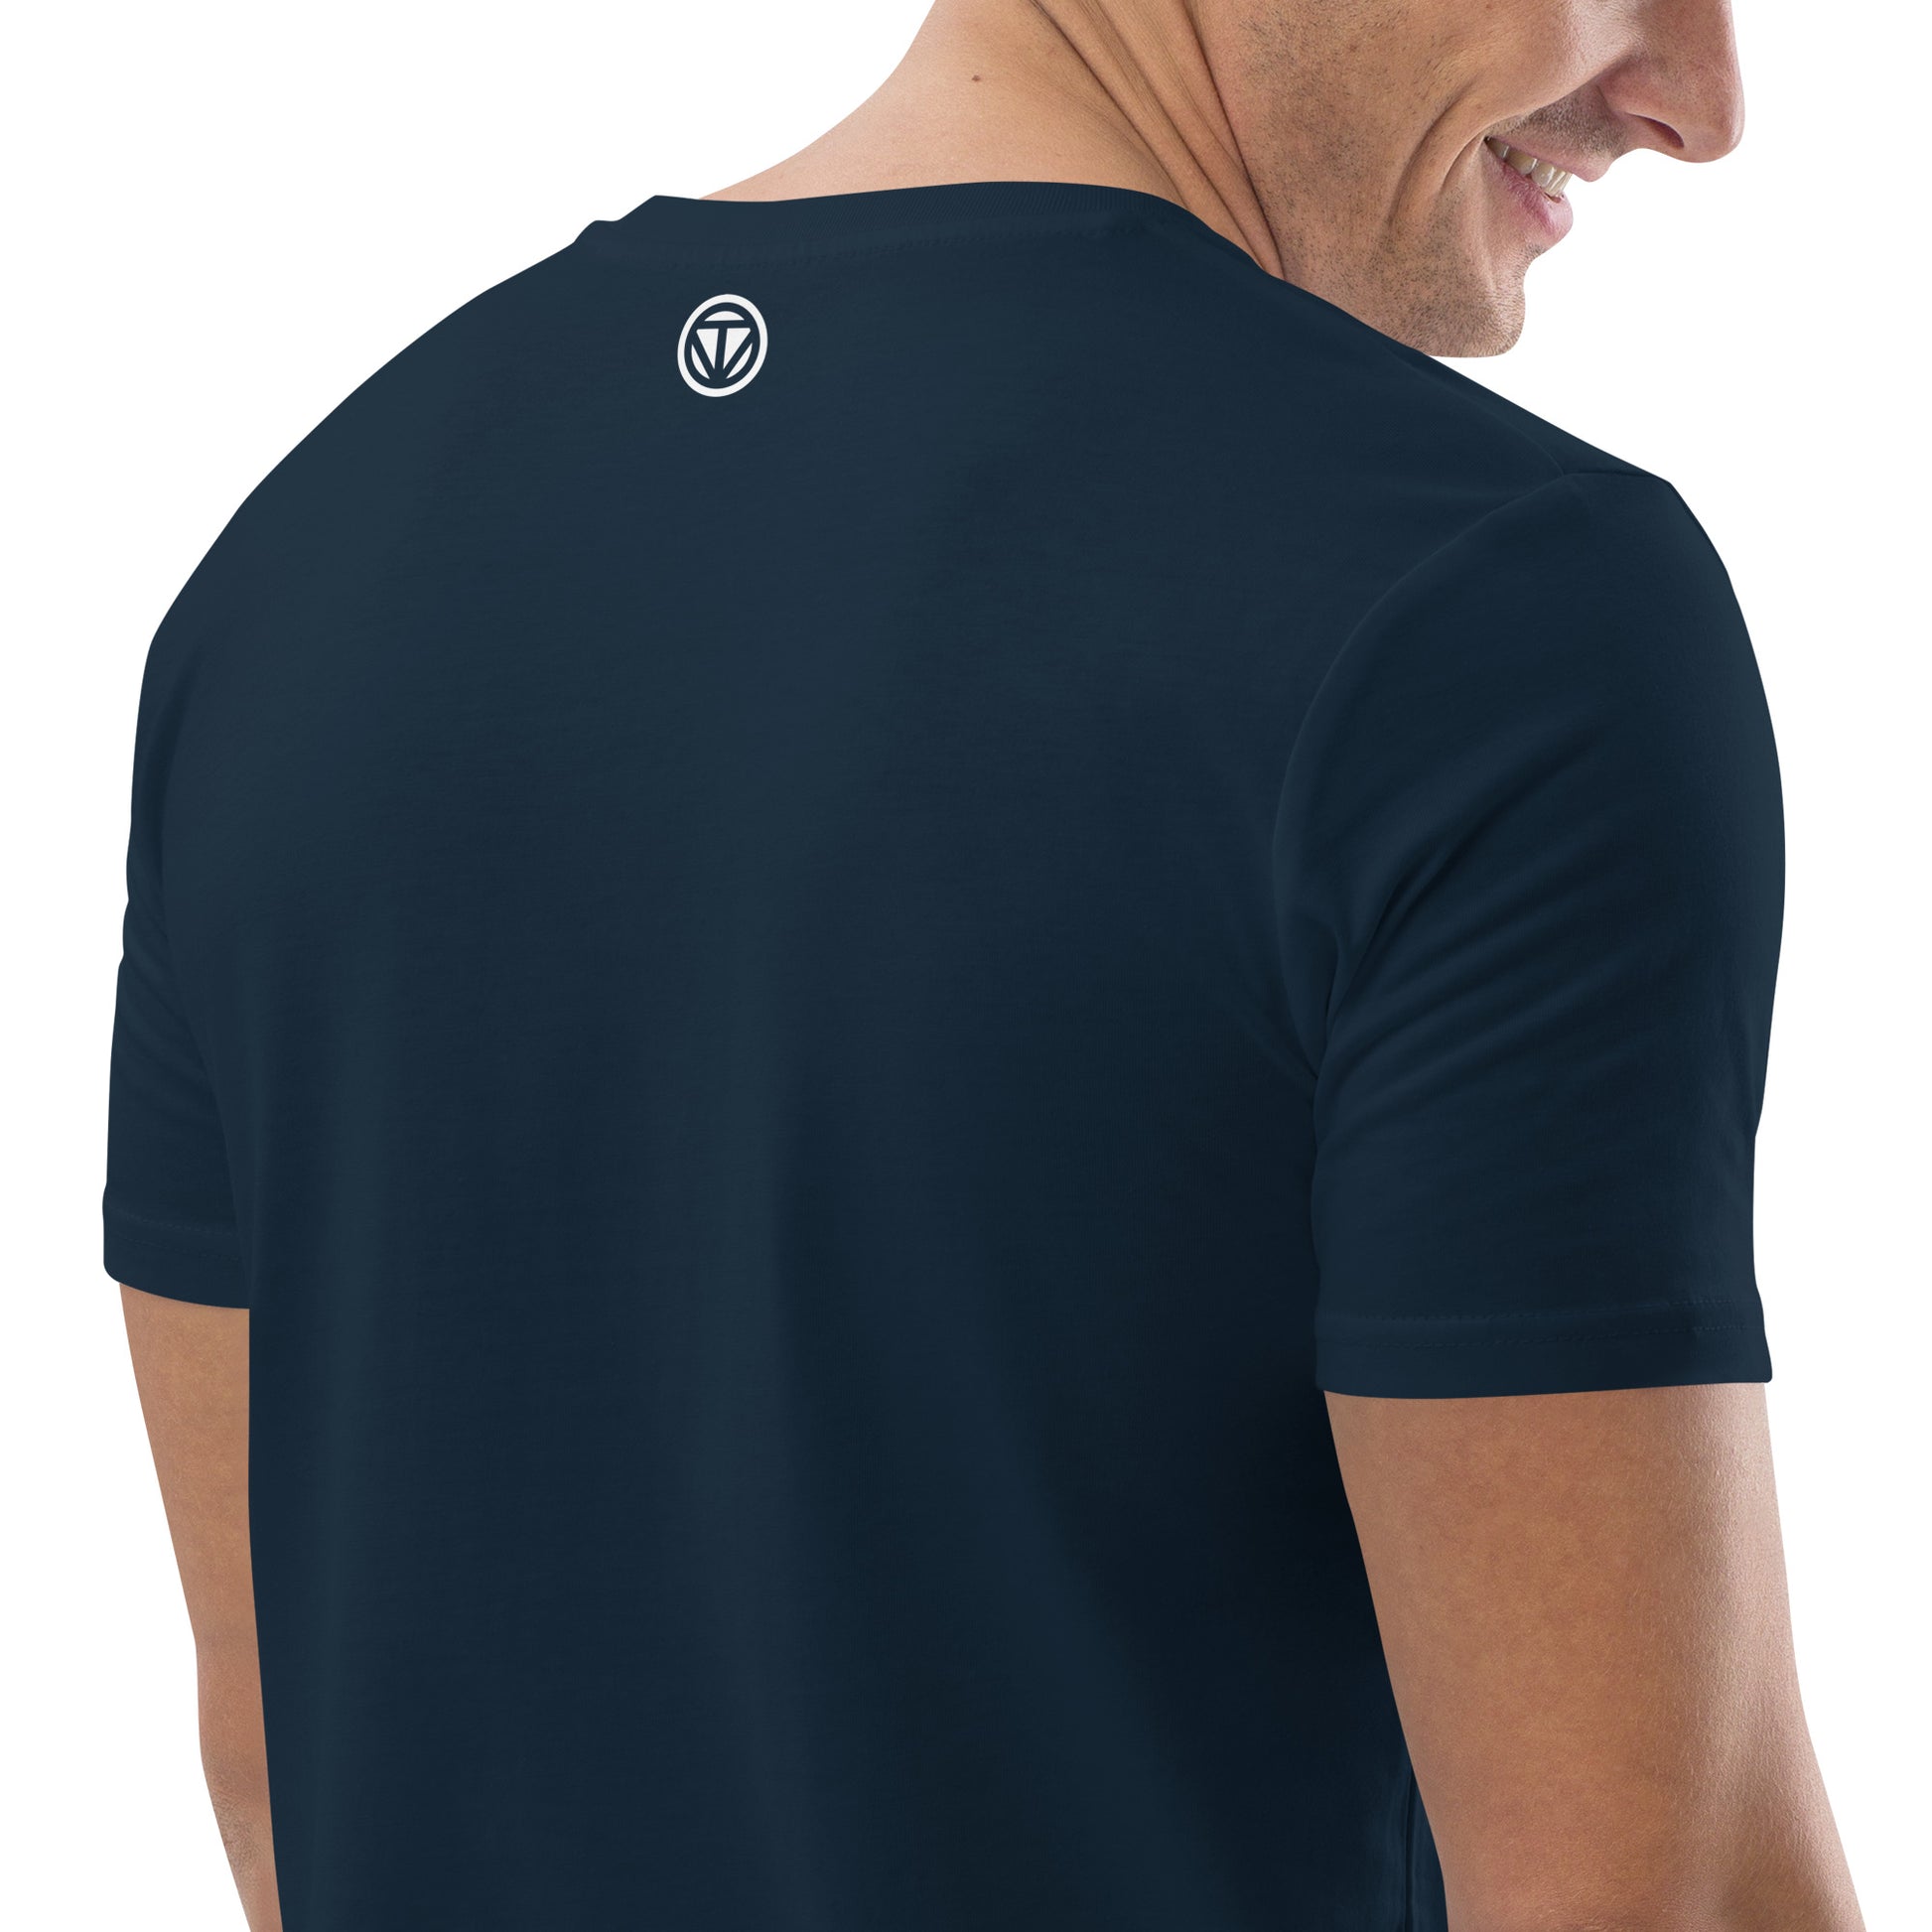 TIME OF VIBES - Organic cotton T-Shirt CURVE (Darkblue) - €32.00